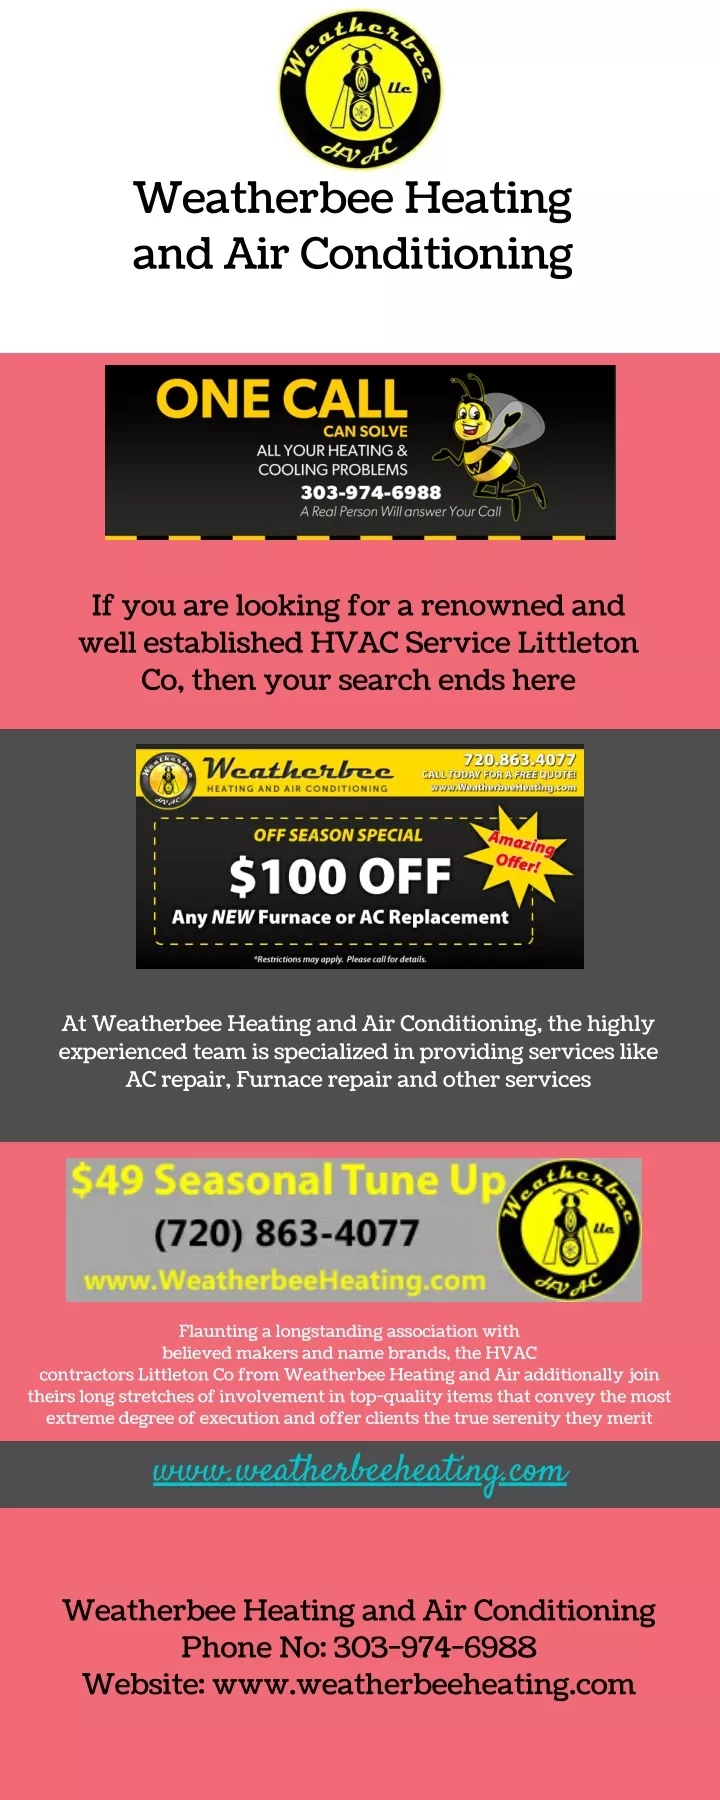 weatherbee heating and air conditioning